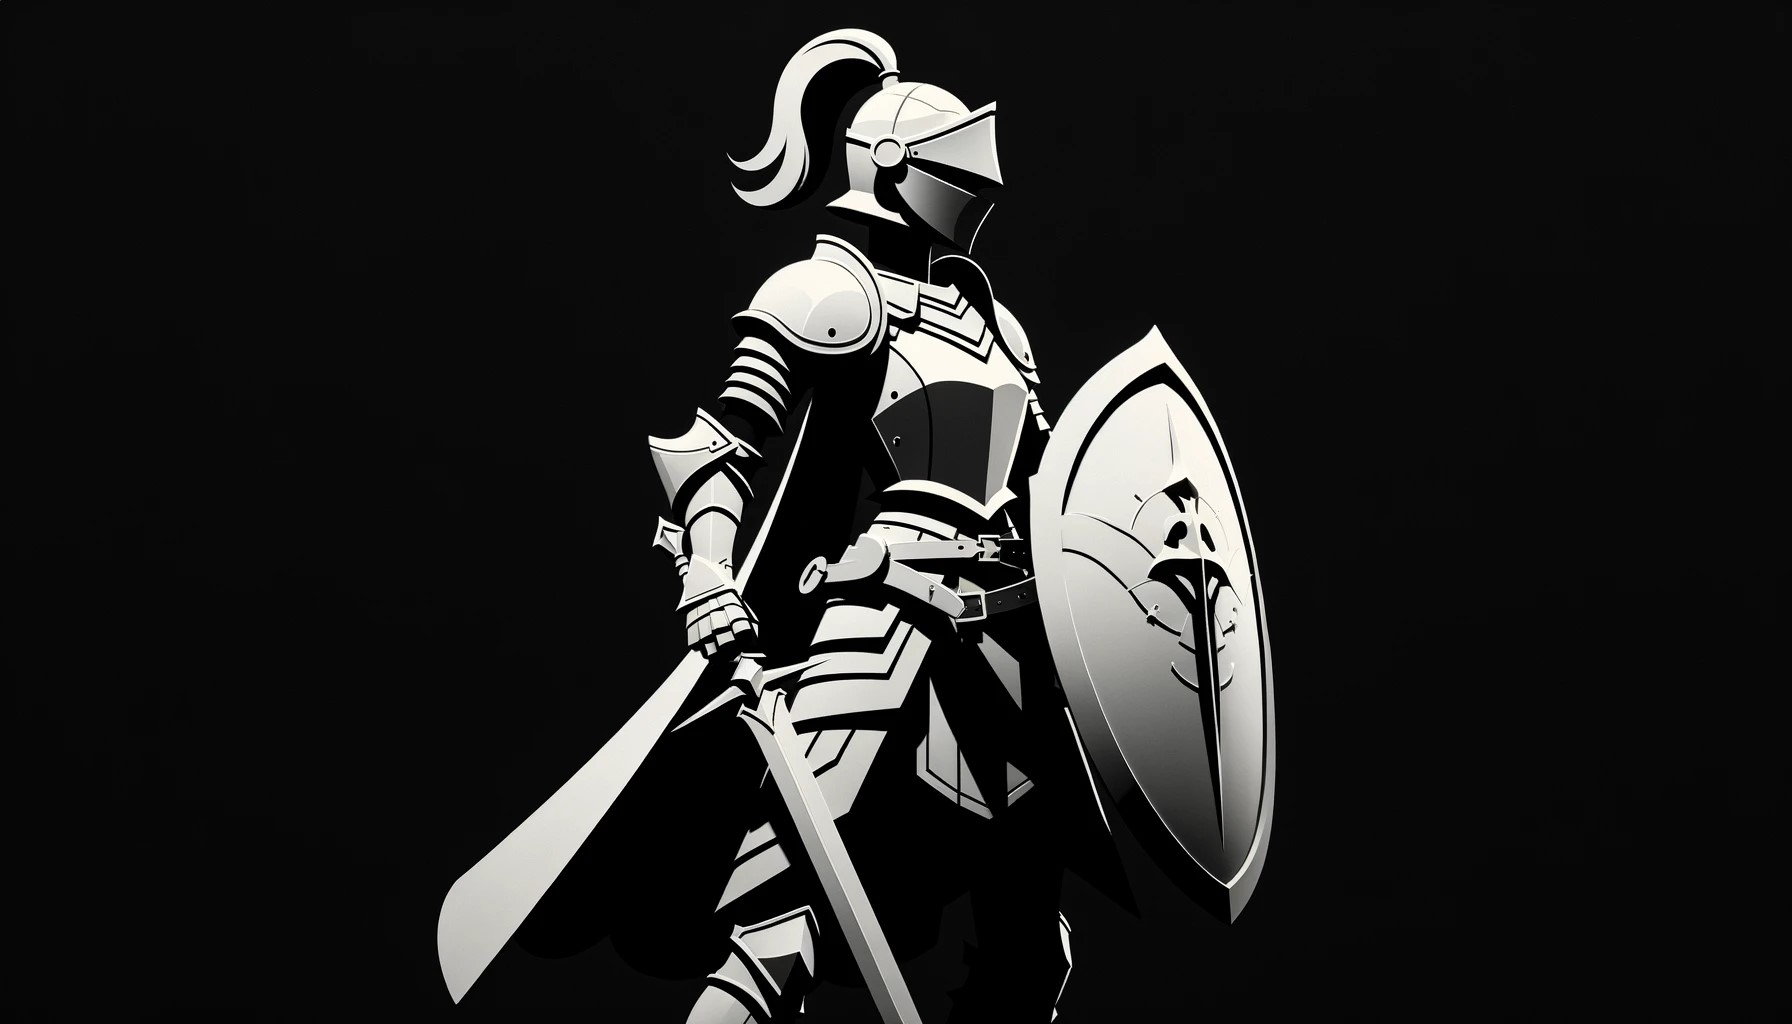 General 1792x1024 Dungeons & Dragons Knight (Dungeon and Fighter) minimalism digital art simple background AI art armor shield cape sword helmet soldier black background